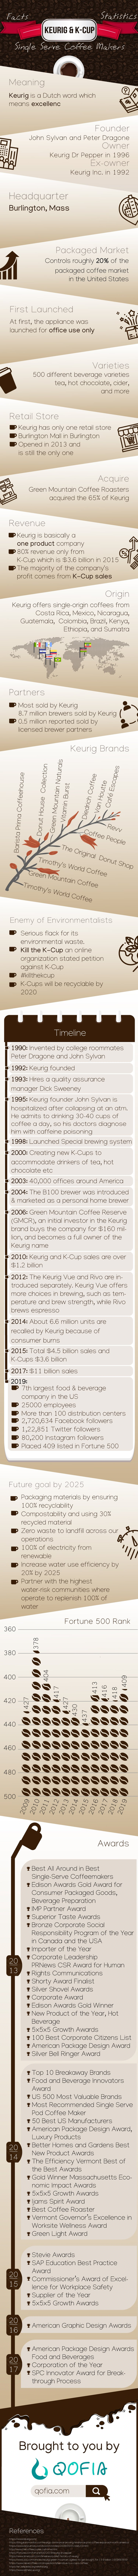 Facts & Statistics of Keurig #infographic